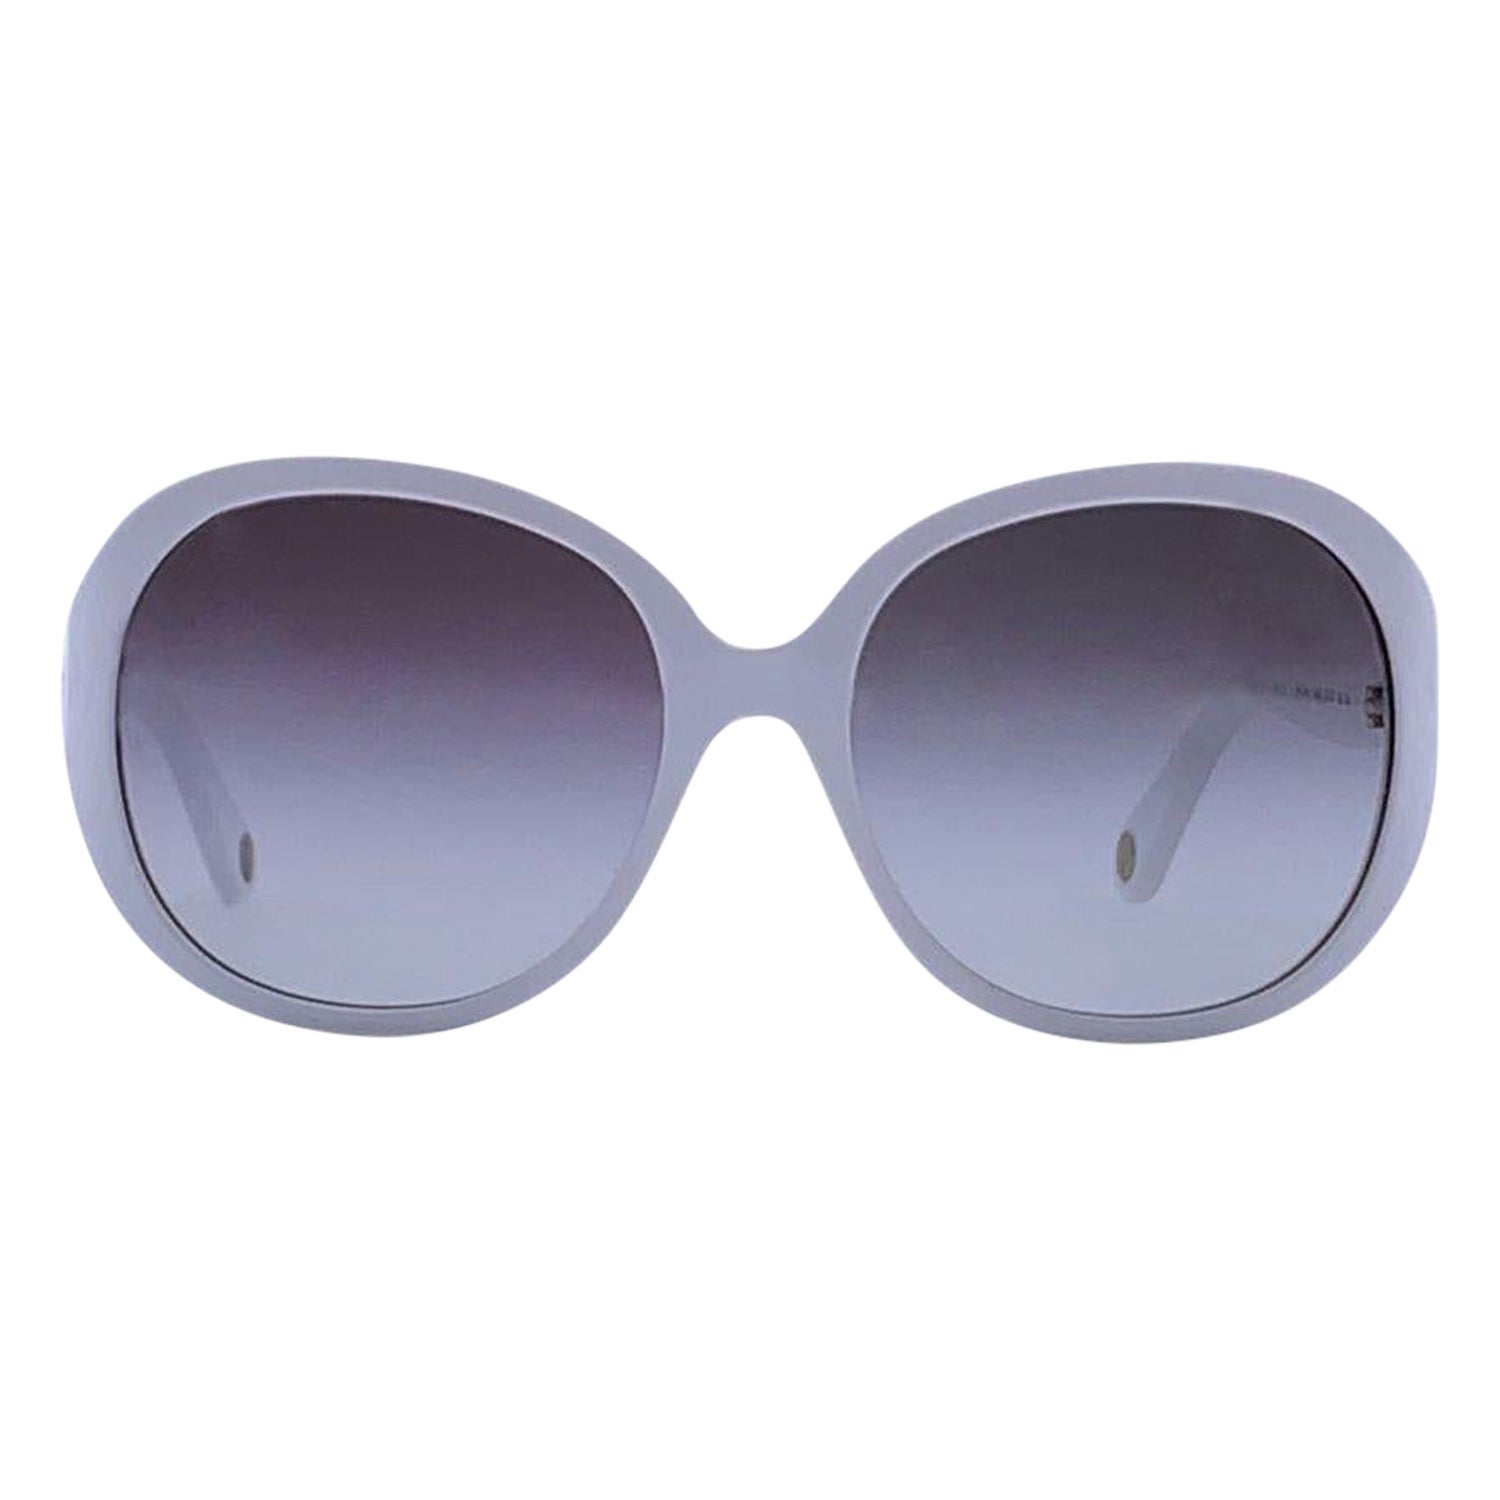 D&G White Acetate Oversized 3034 Sunglasess 57/17 130mm For Sale